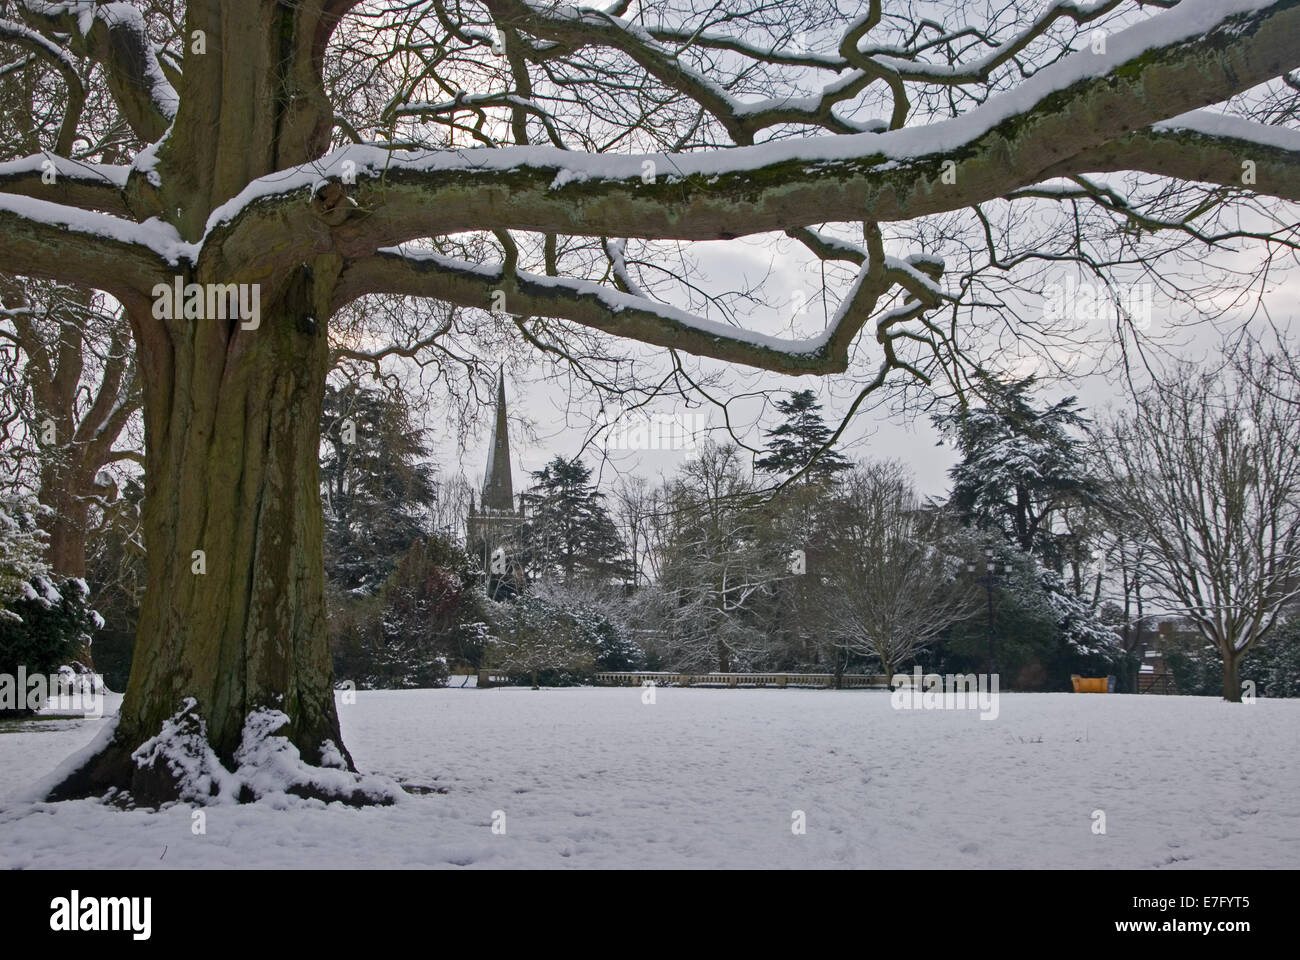 Winter snowfall in th park covers tree branches, with Holy Trinity church spire, Stratford upon Avon in the background. Stock Photo